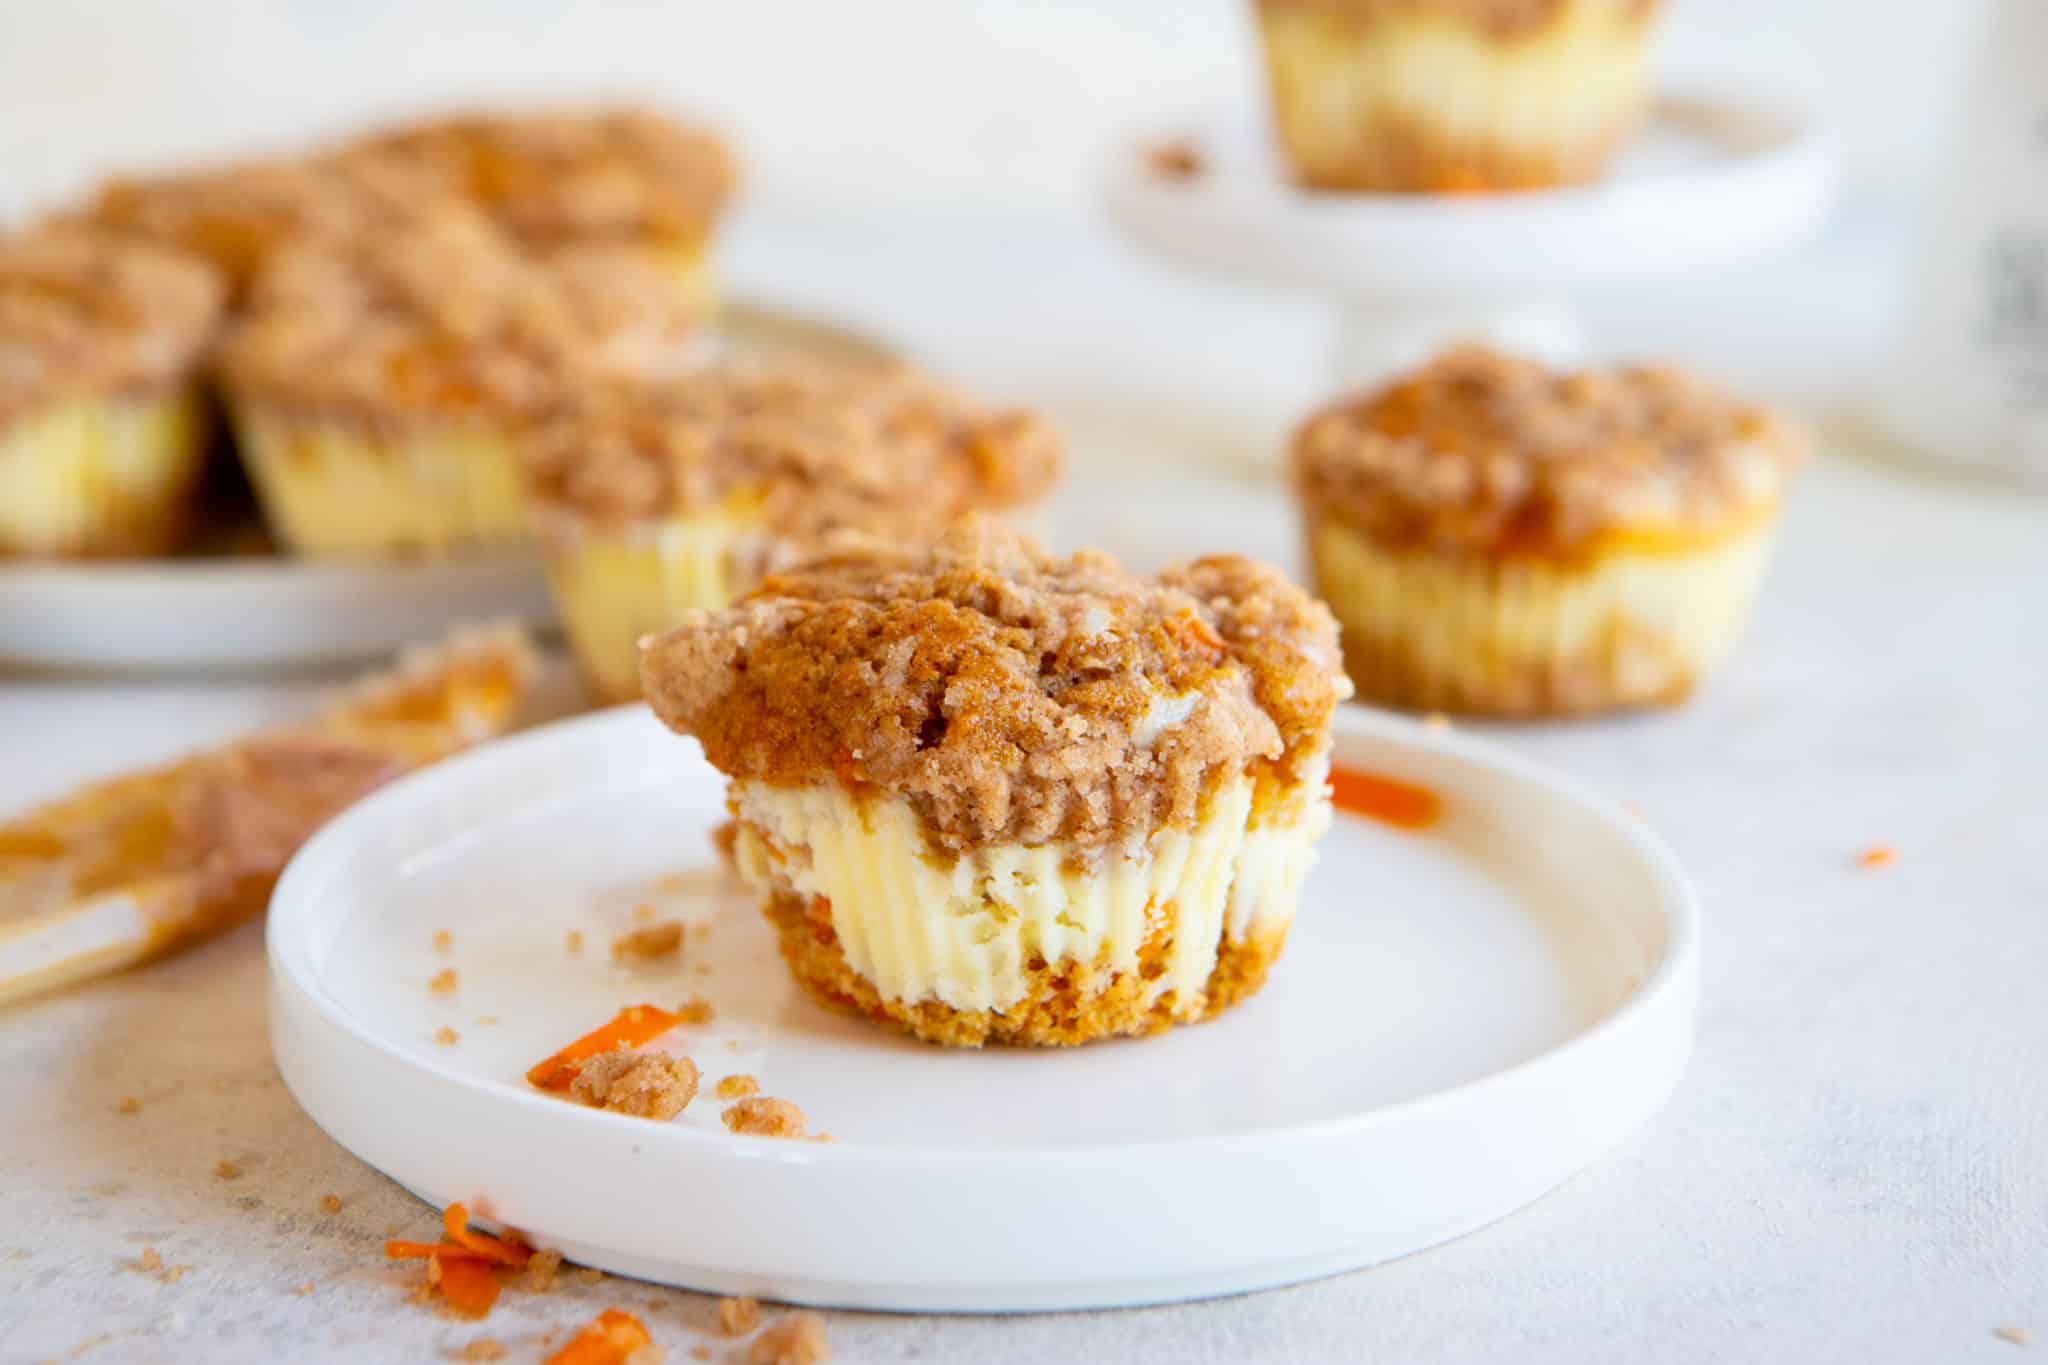 A carrot cake muffin on a plate.